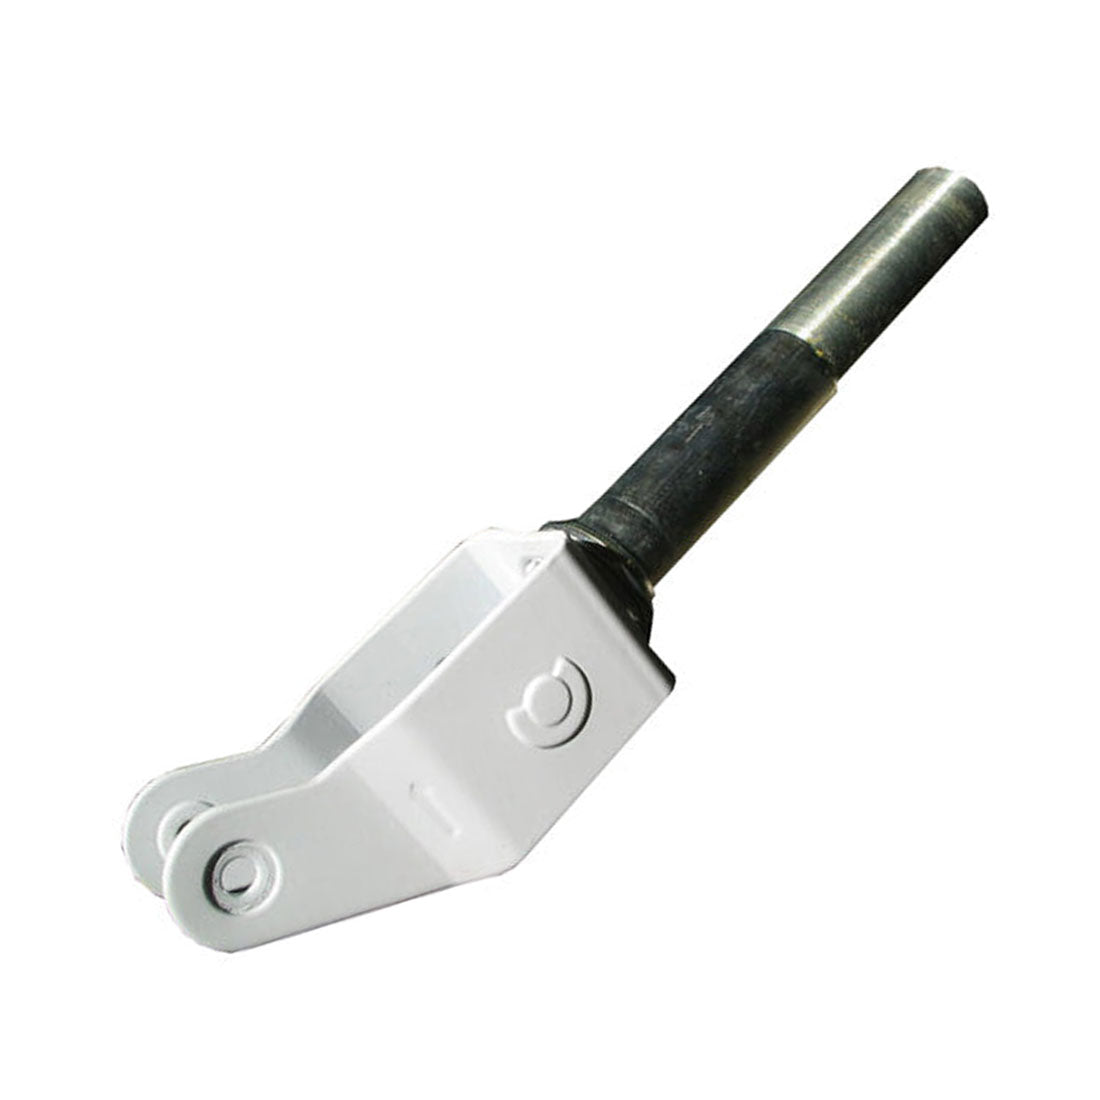 Micro Scooter Steering Fork - White 1192 Scooter Hardware and Parts